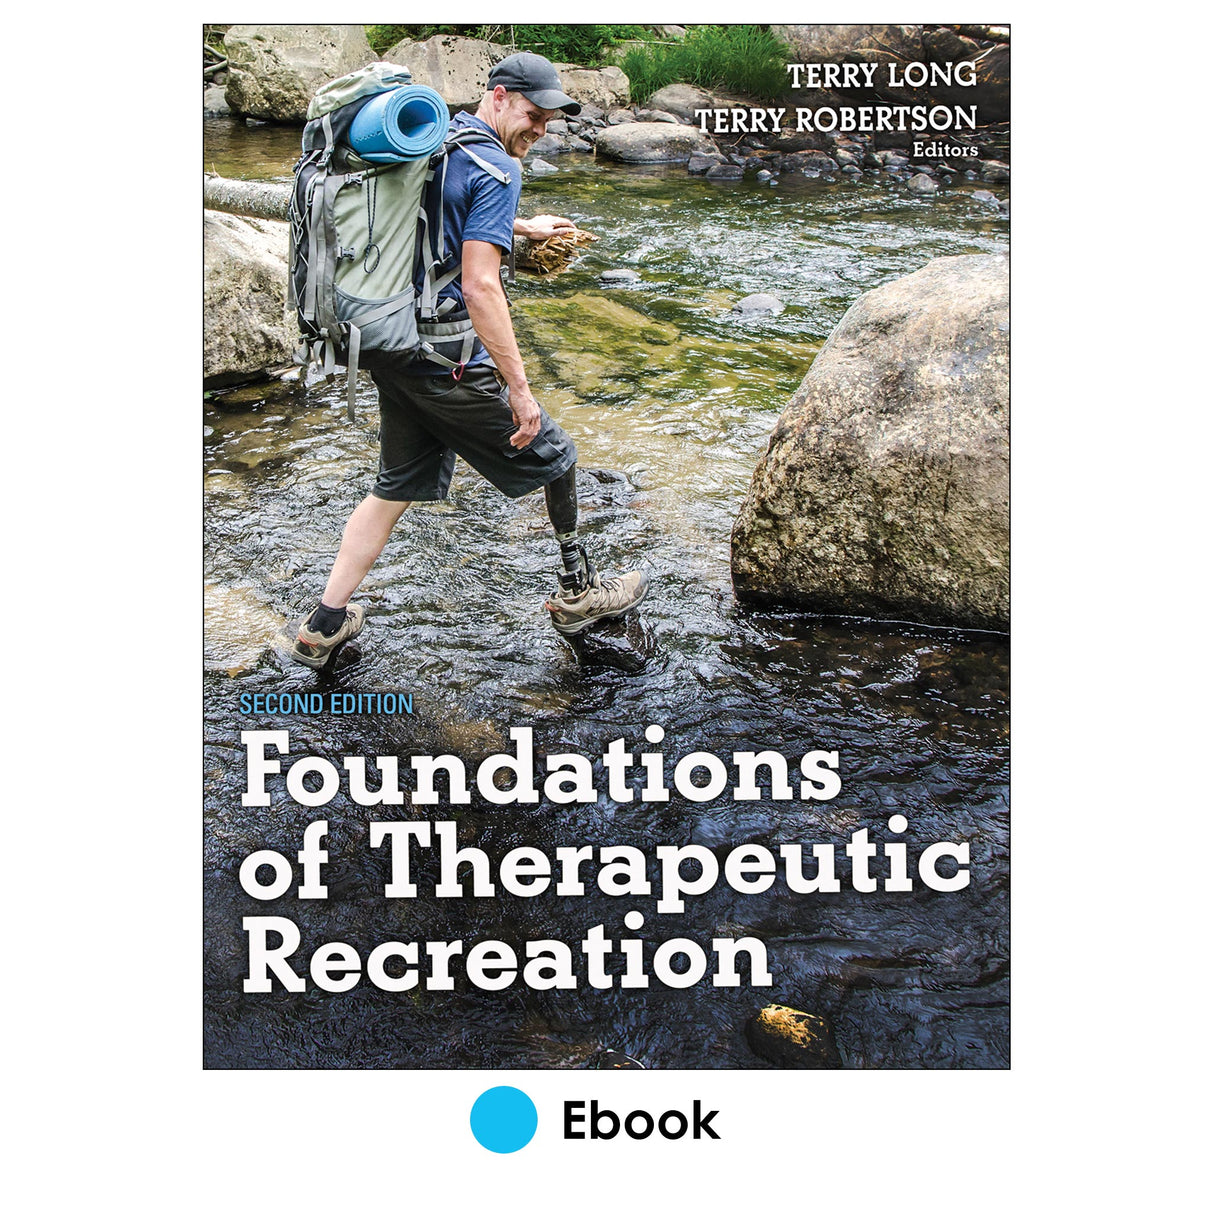 Foundations of Therapeutic Recreation 2nd Edition epub